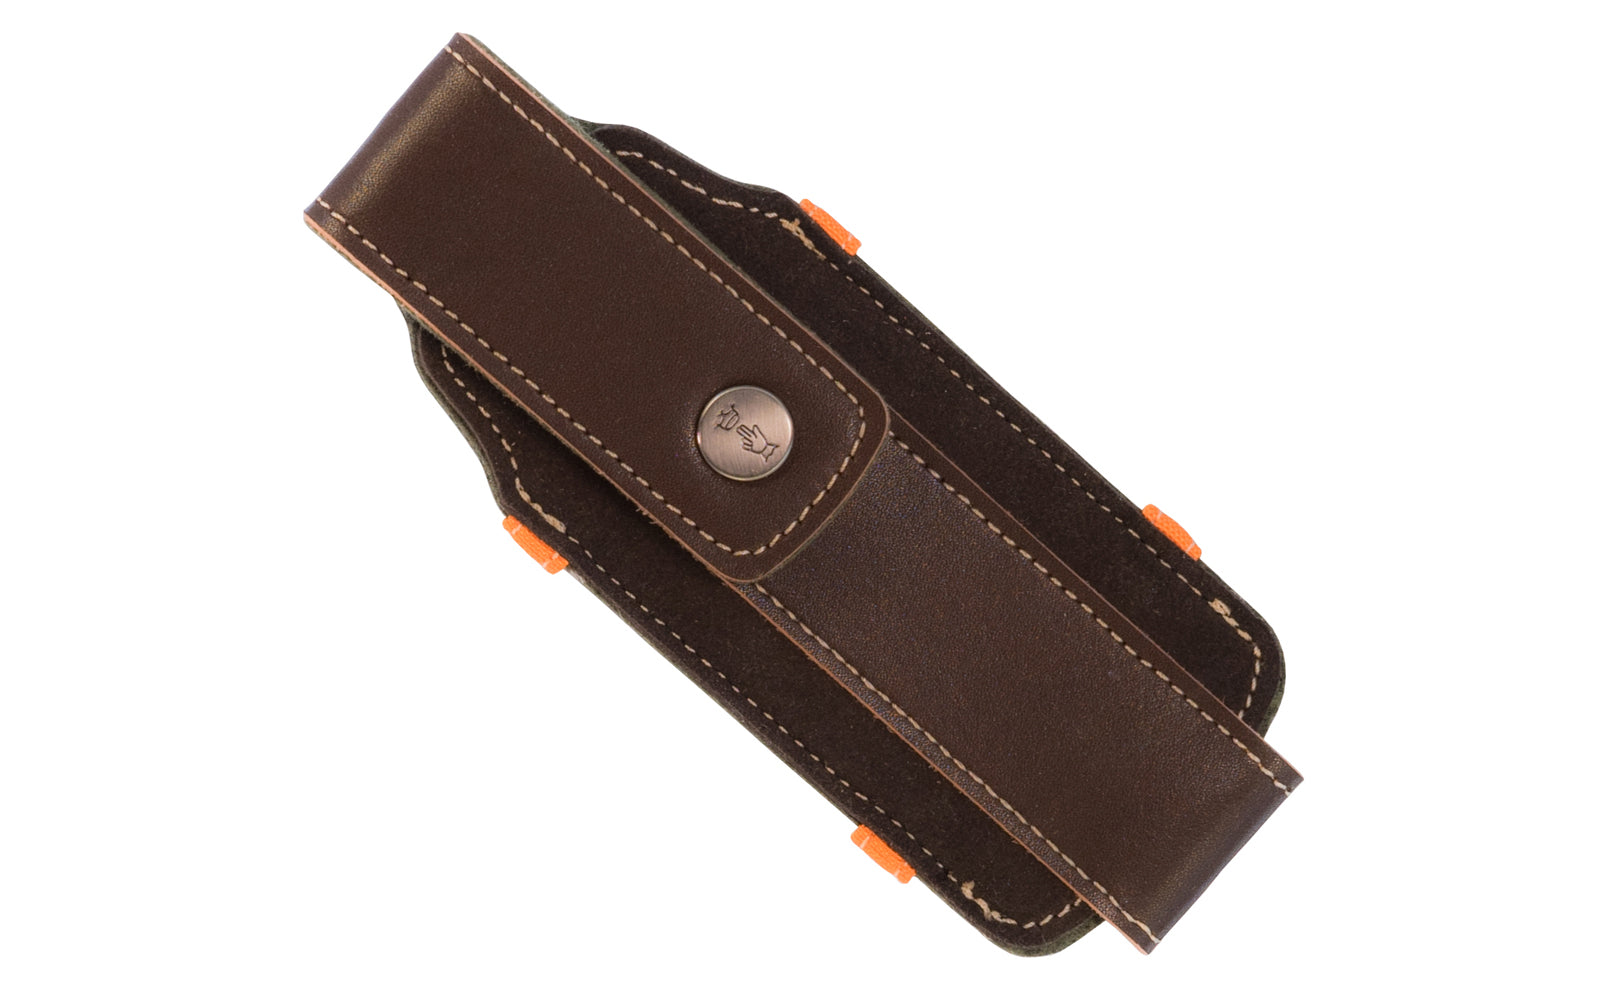 This Opinel Outdoor Large Brown Knife Sheath sheath can be hung by the orange webbing, or attached to a belt for a snug fit. Made of brown synthetic leather with stitching & a snap enclosure that will keep your knife safely secured during transport.